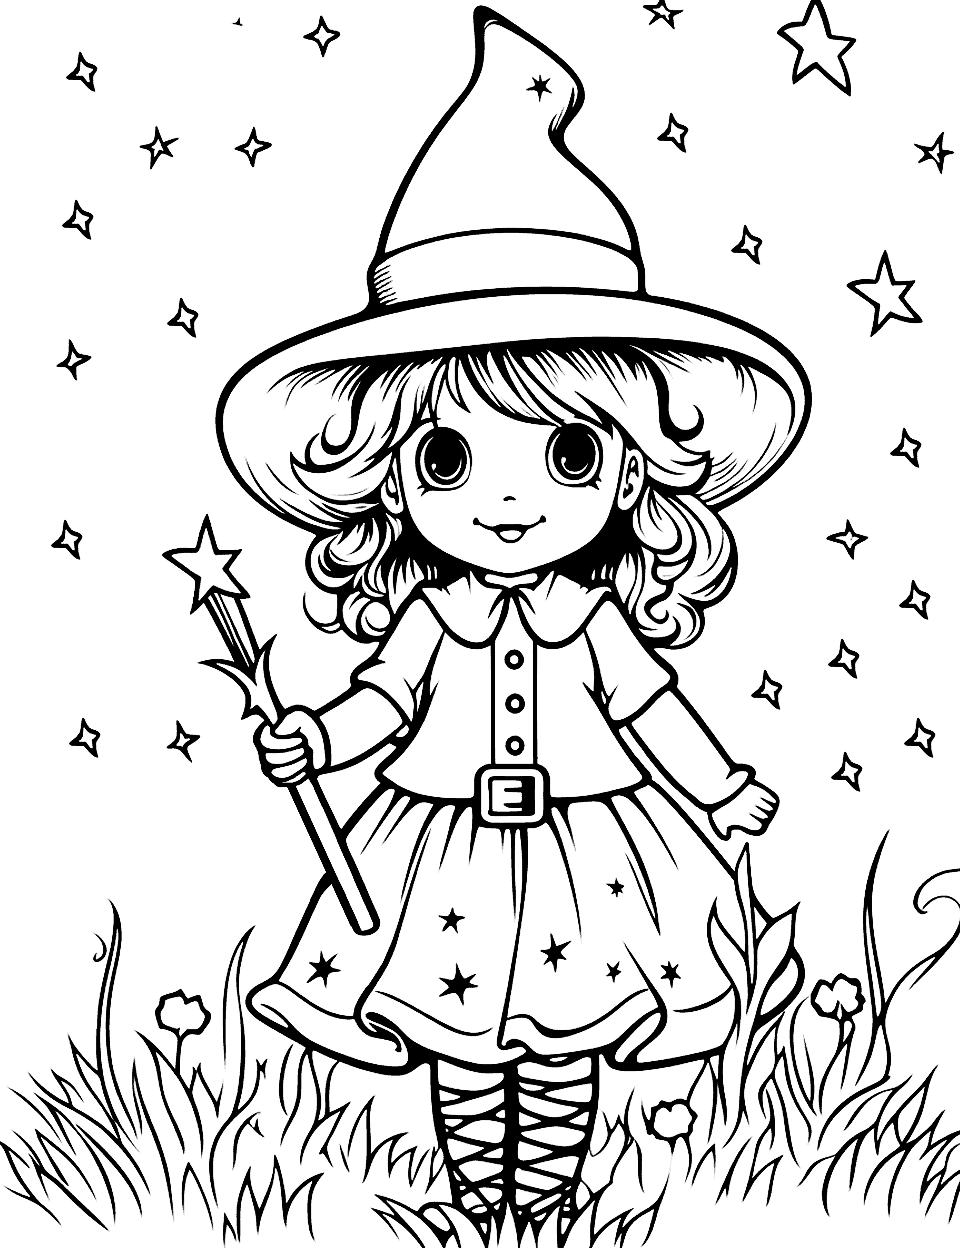 Minnie the Young Witch Coloring Page - Minnie, a youthful witch, going through a meadow on a starry night.